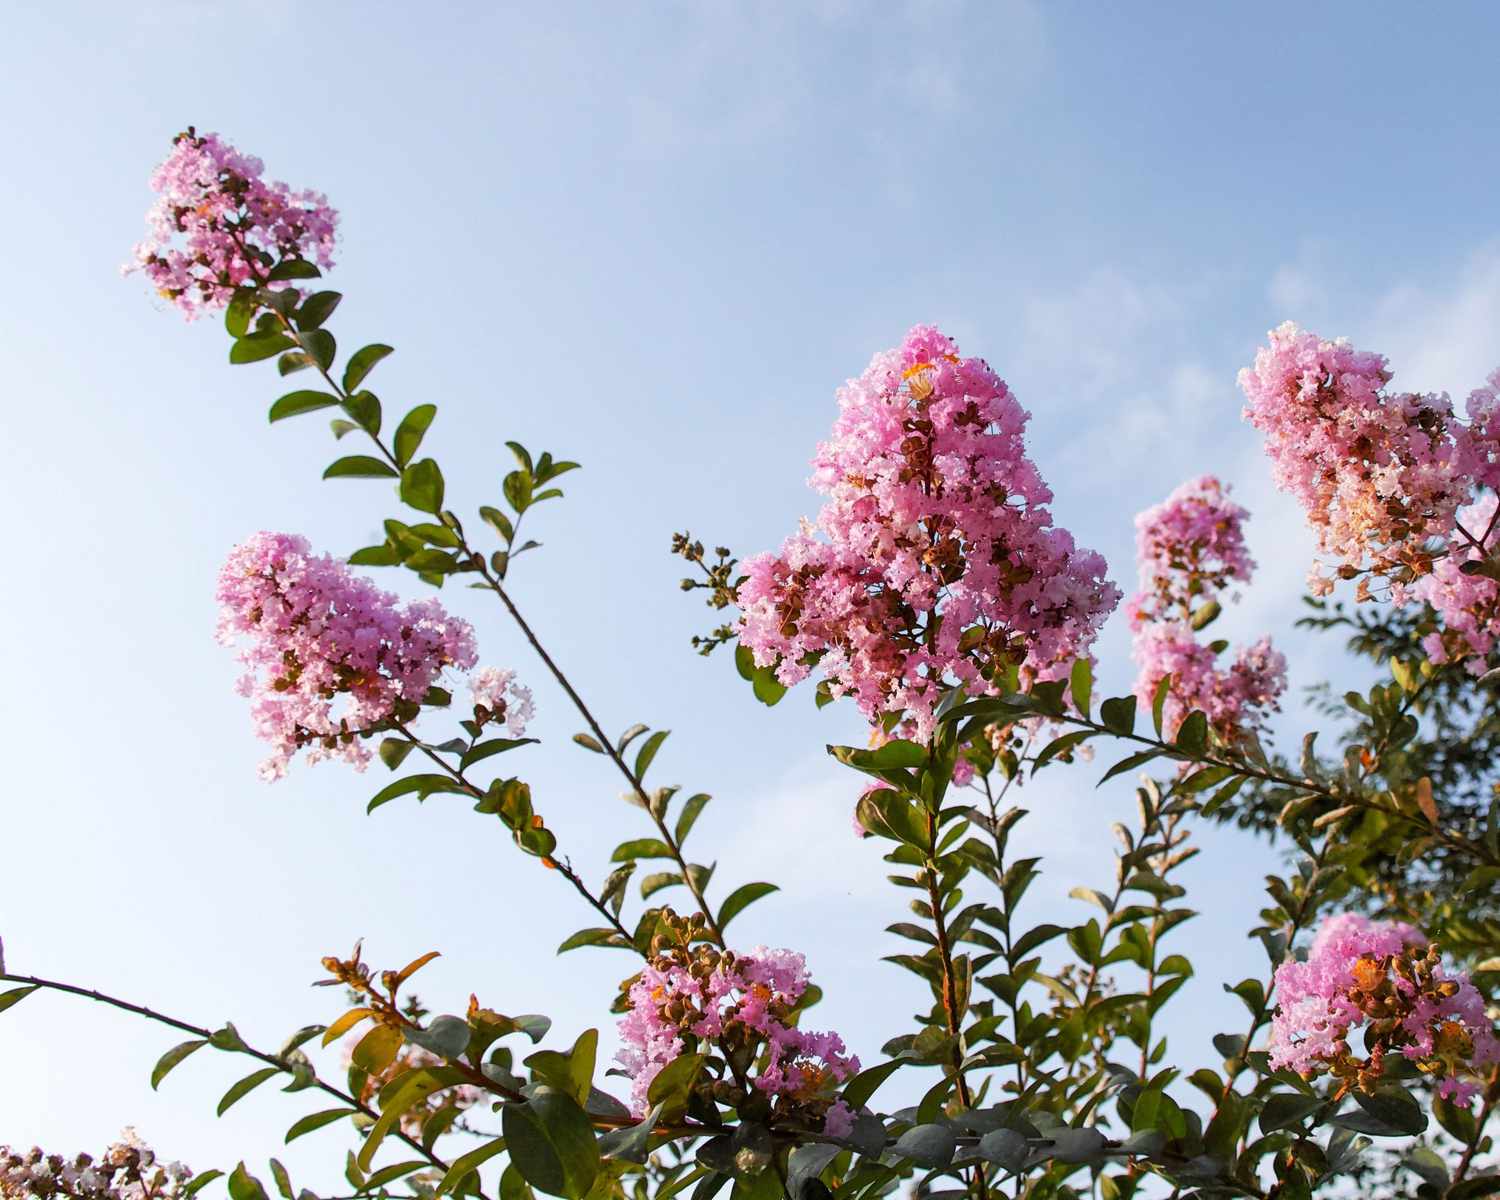 Crepe Myrtle Branches with Pink Flowers Against Blue Sky